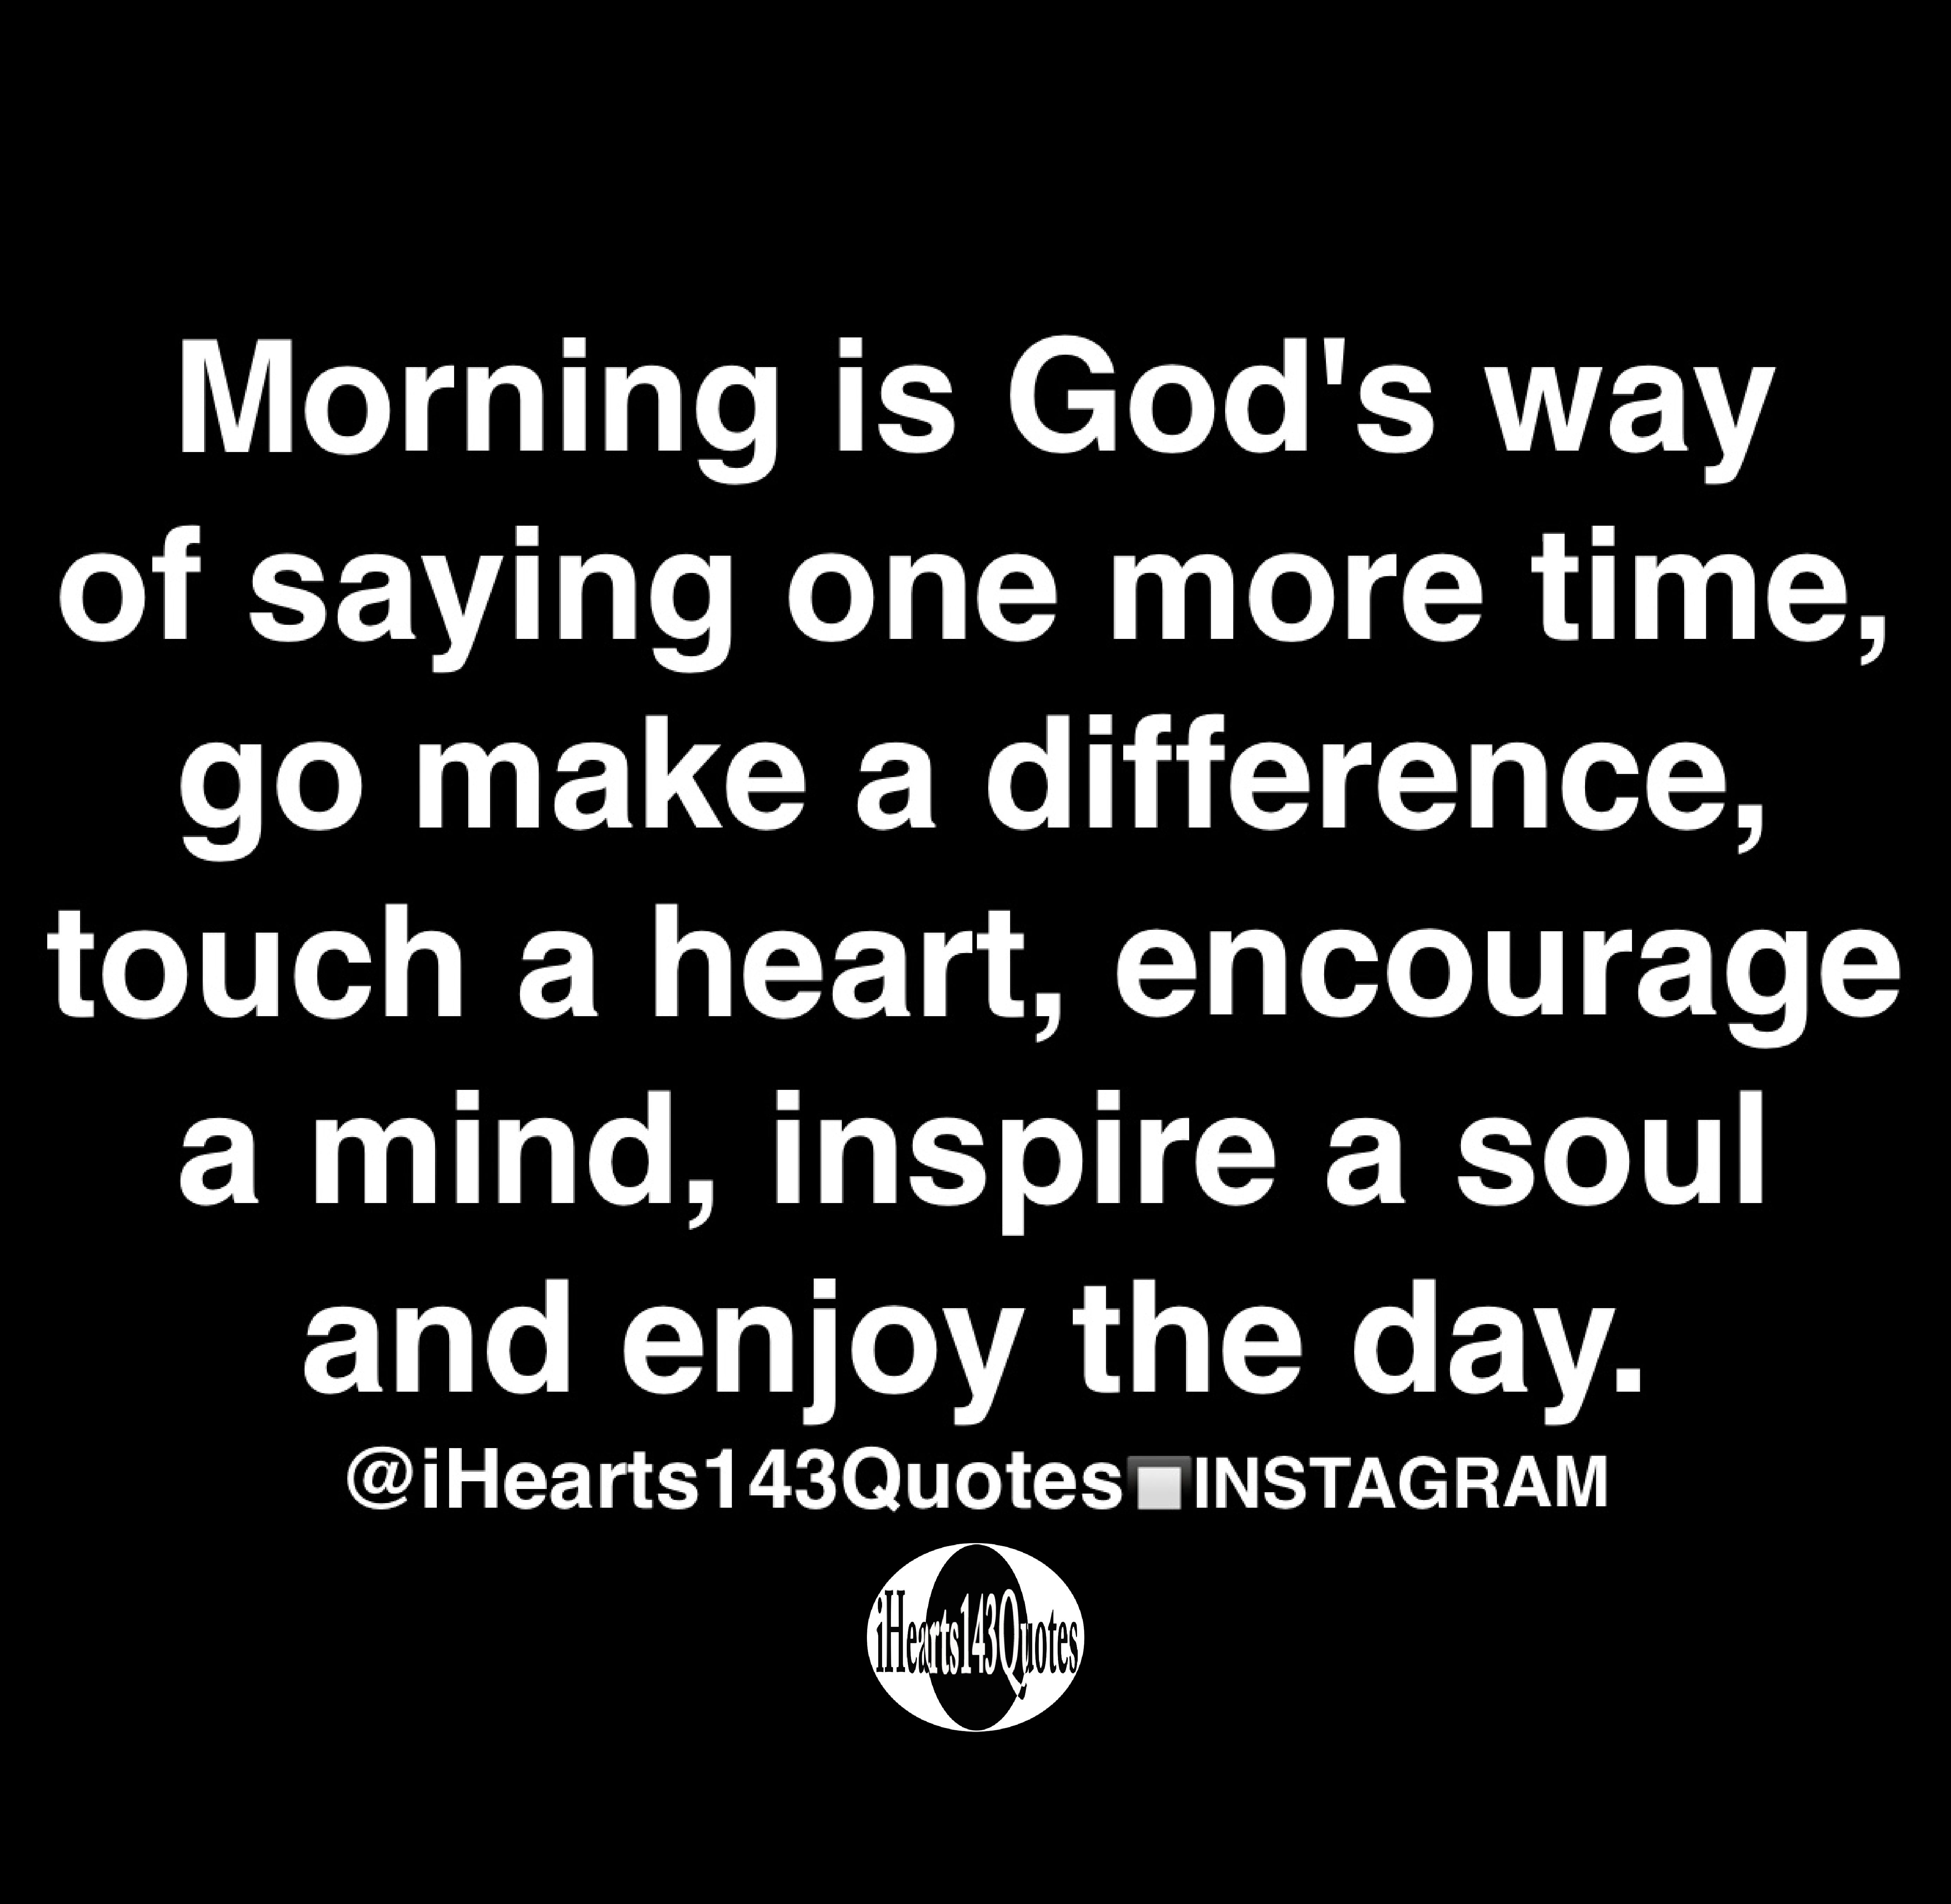 Morning Is God S Way Of Saying One More Time Go Make A Difference Touch A Heart Encourage A Mind Inspire A Soul And Enjoy The Day Quotes Ihearts143quotes